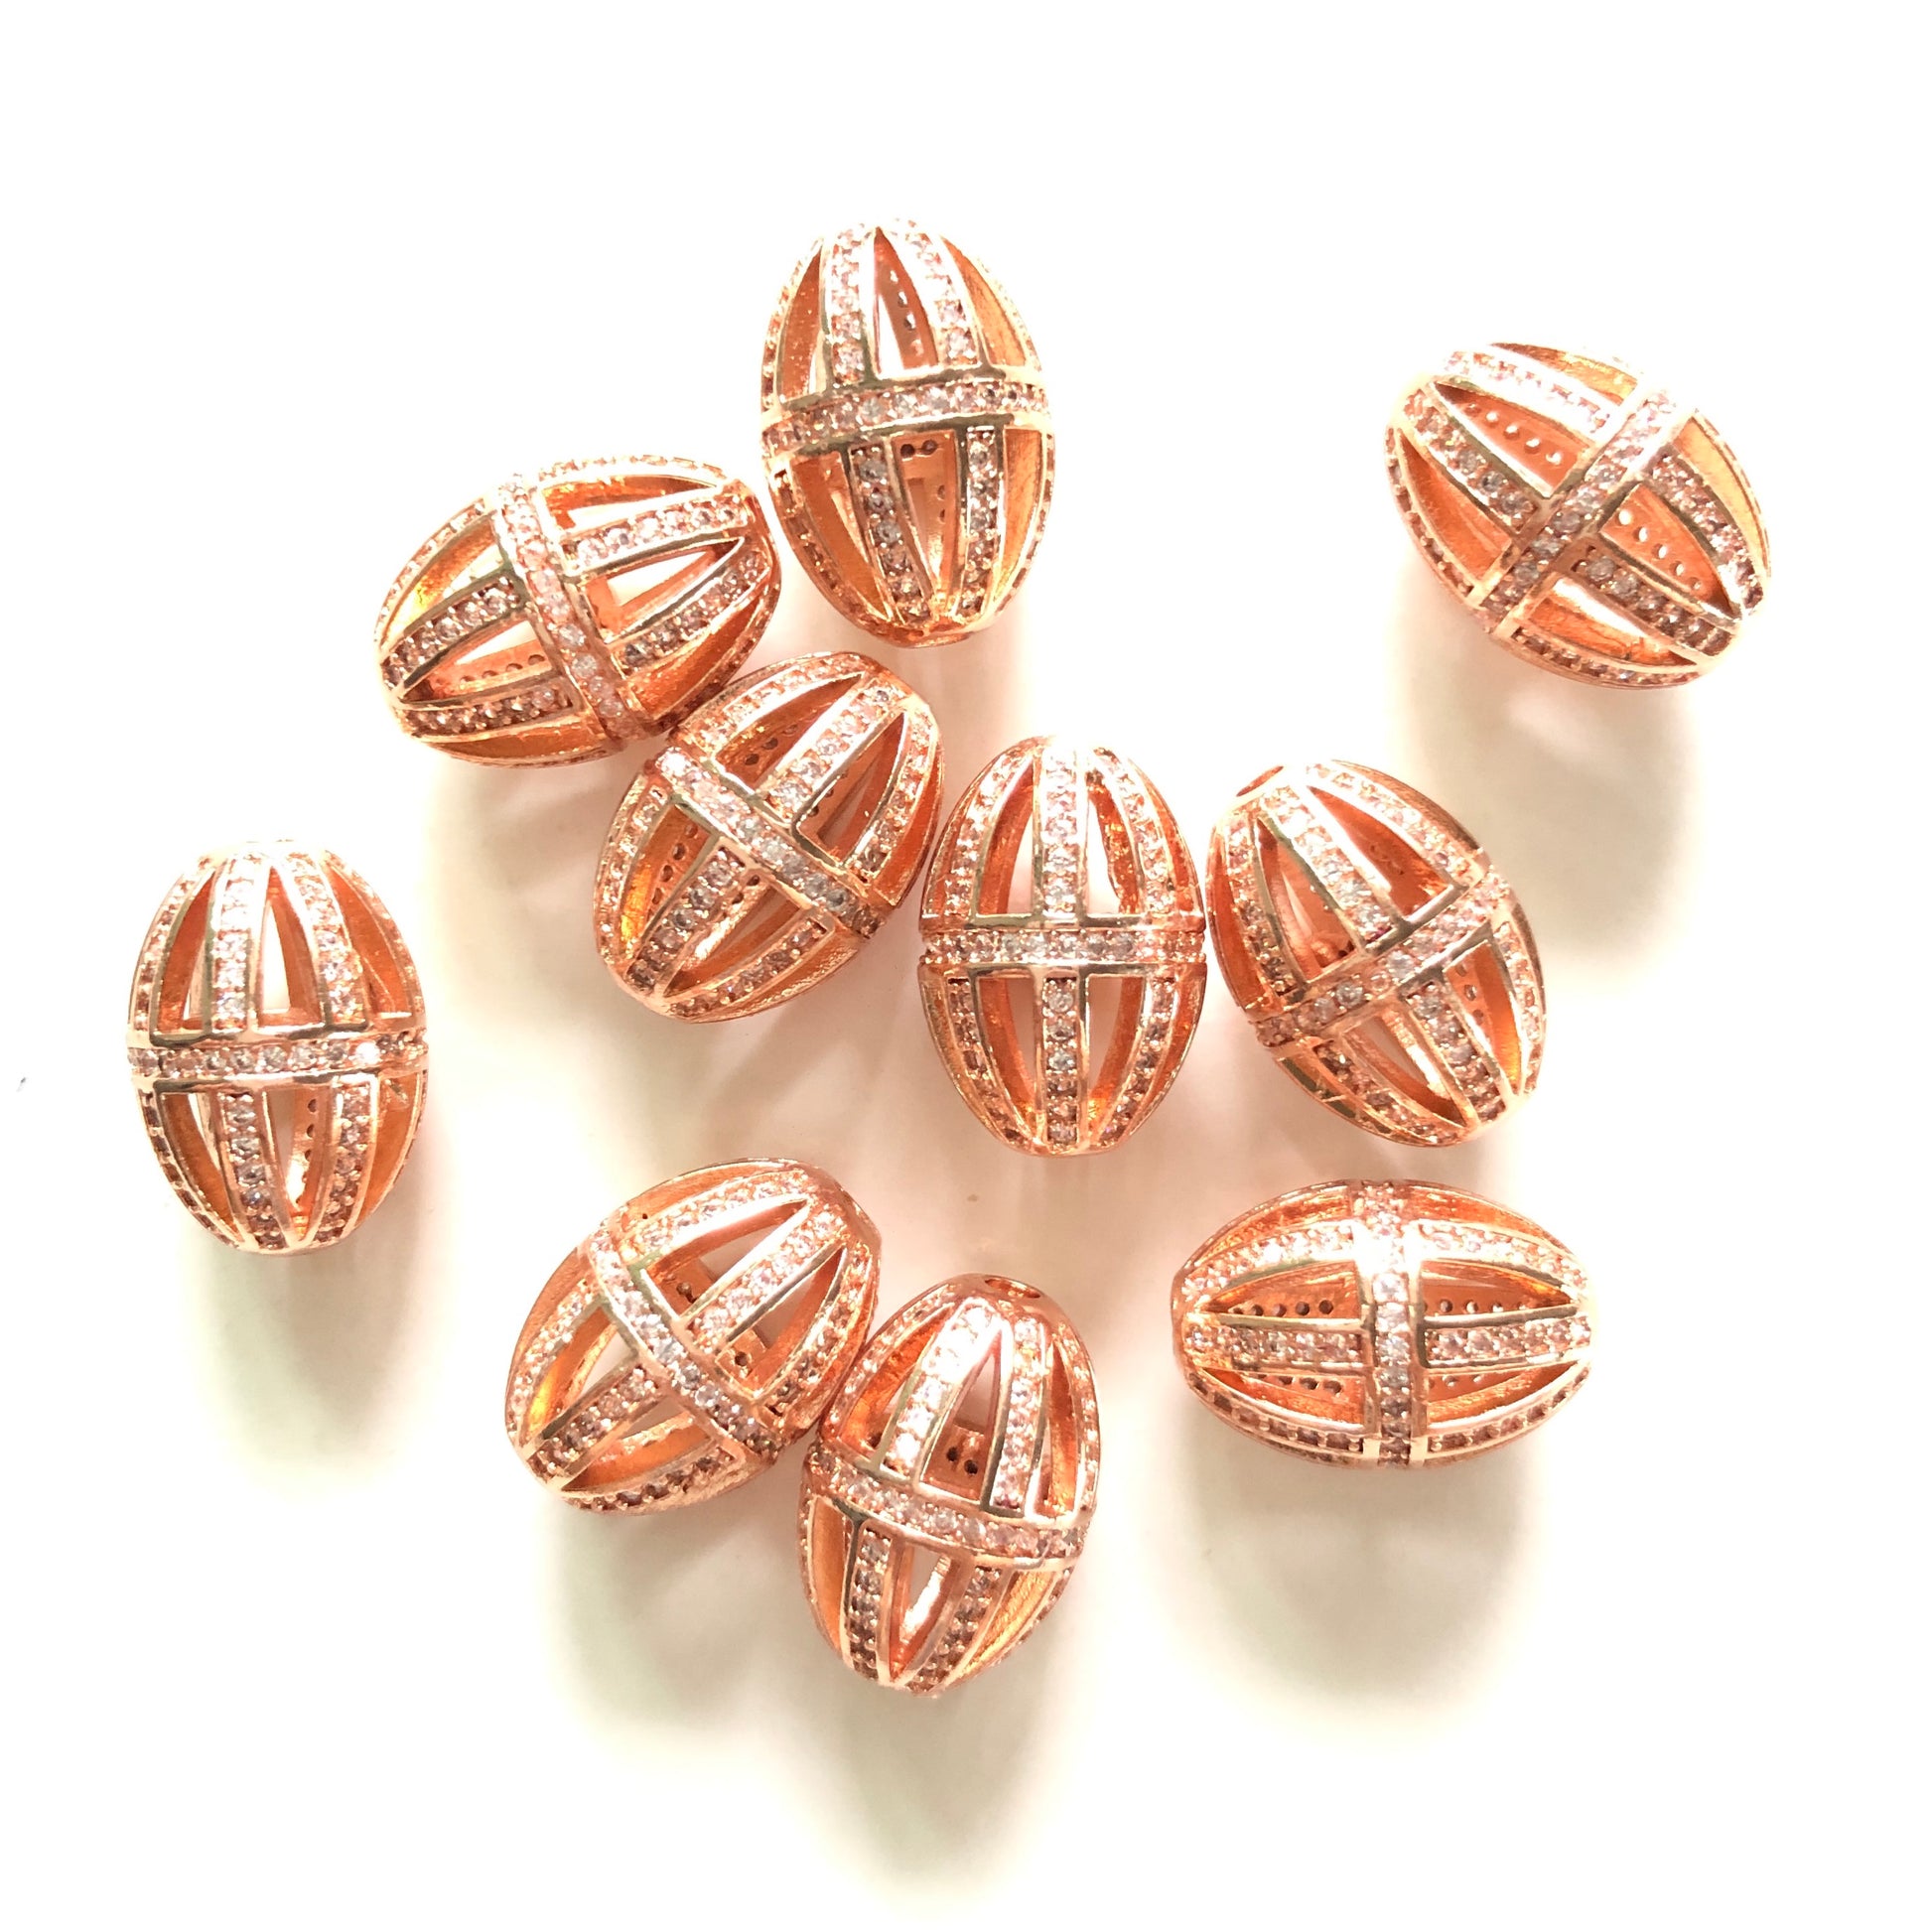 10pcs/lot 16.5*11.5mm CZ Paved Hollow Olive Beads Spacers Rose Gold CZ Paved Spacers Oval Spacers Charms Beads Beyond